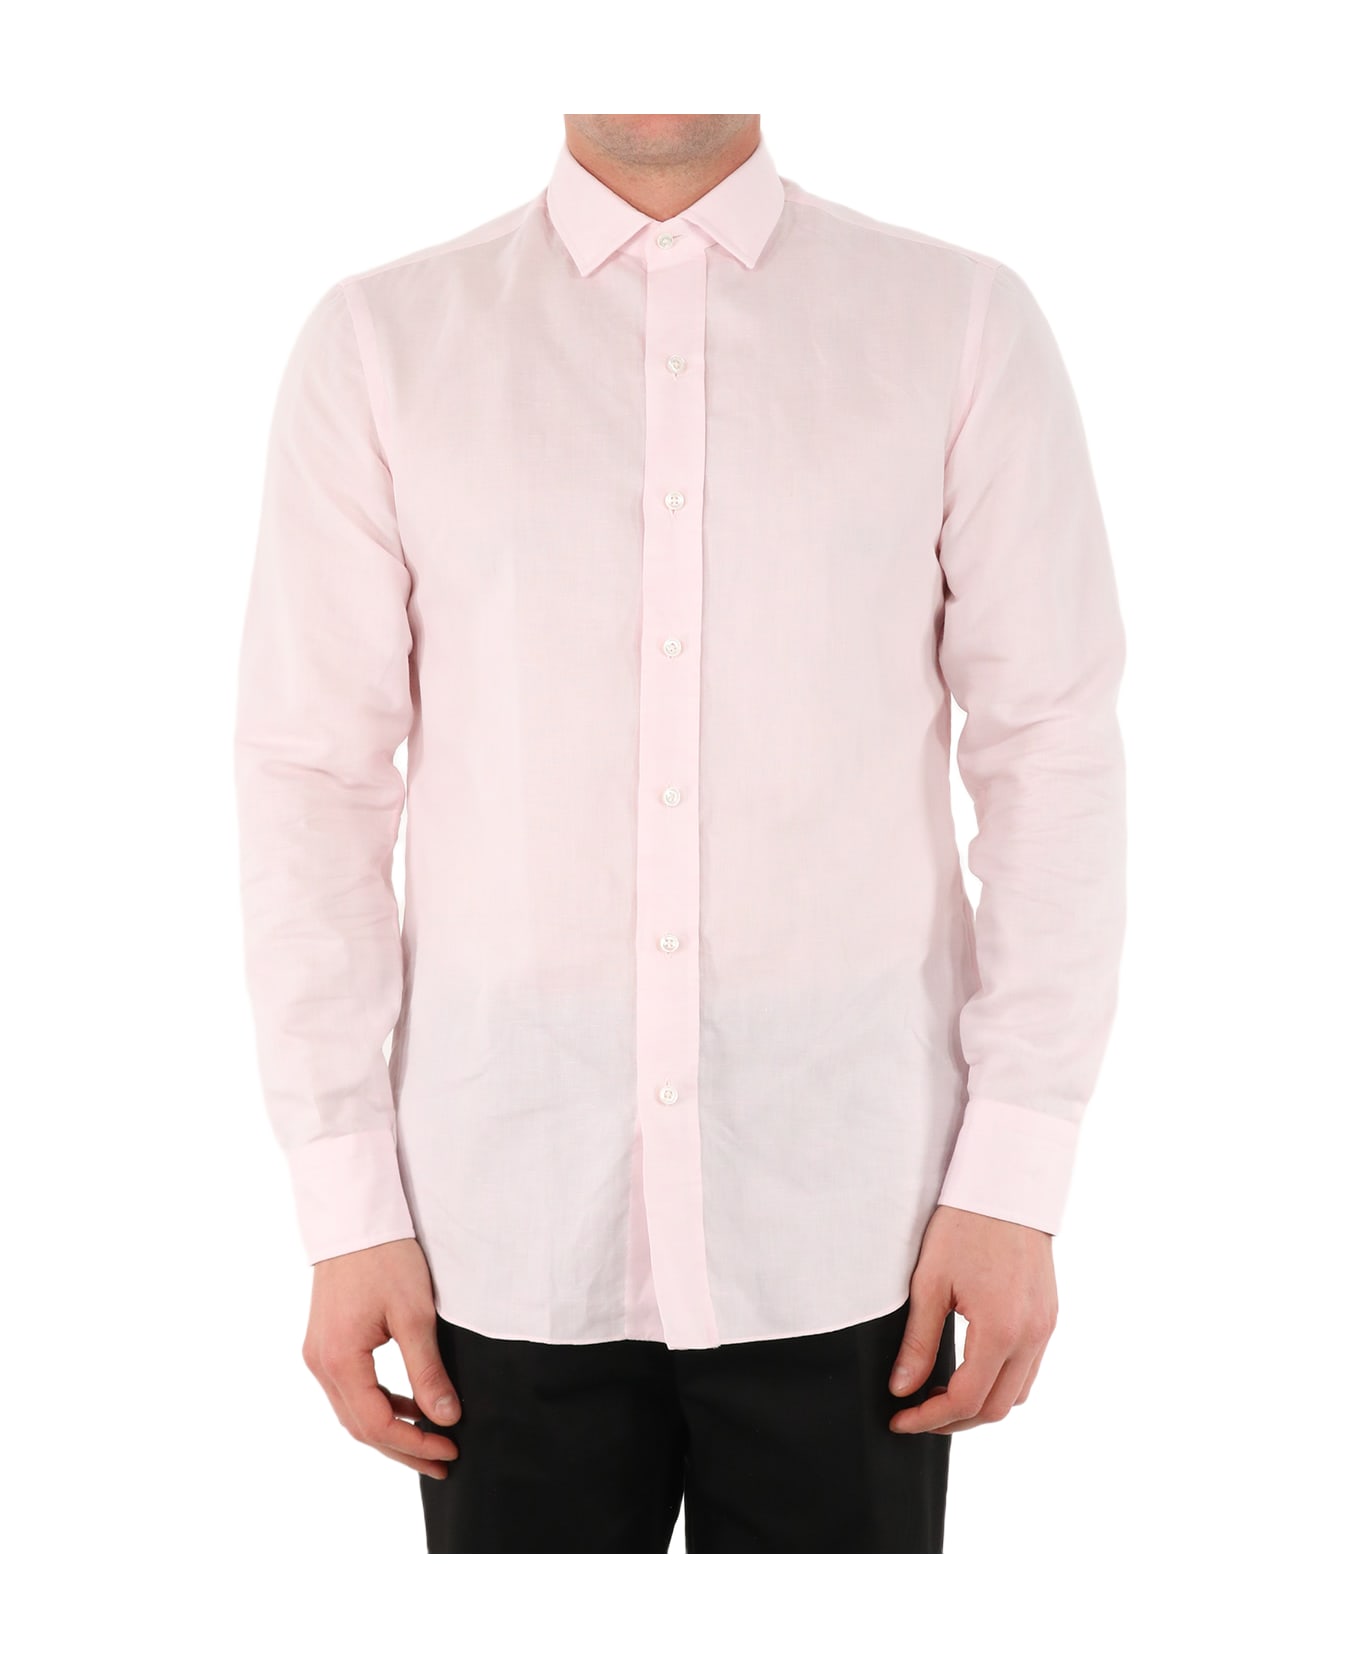 Salvatore Piccolo Pink Shirt With Open Collar - PINK シャツ